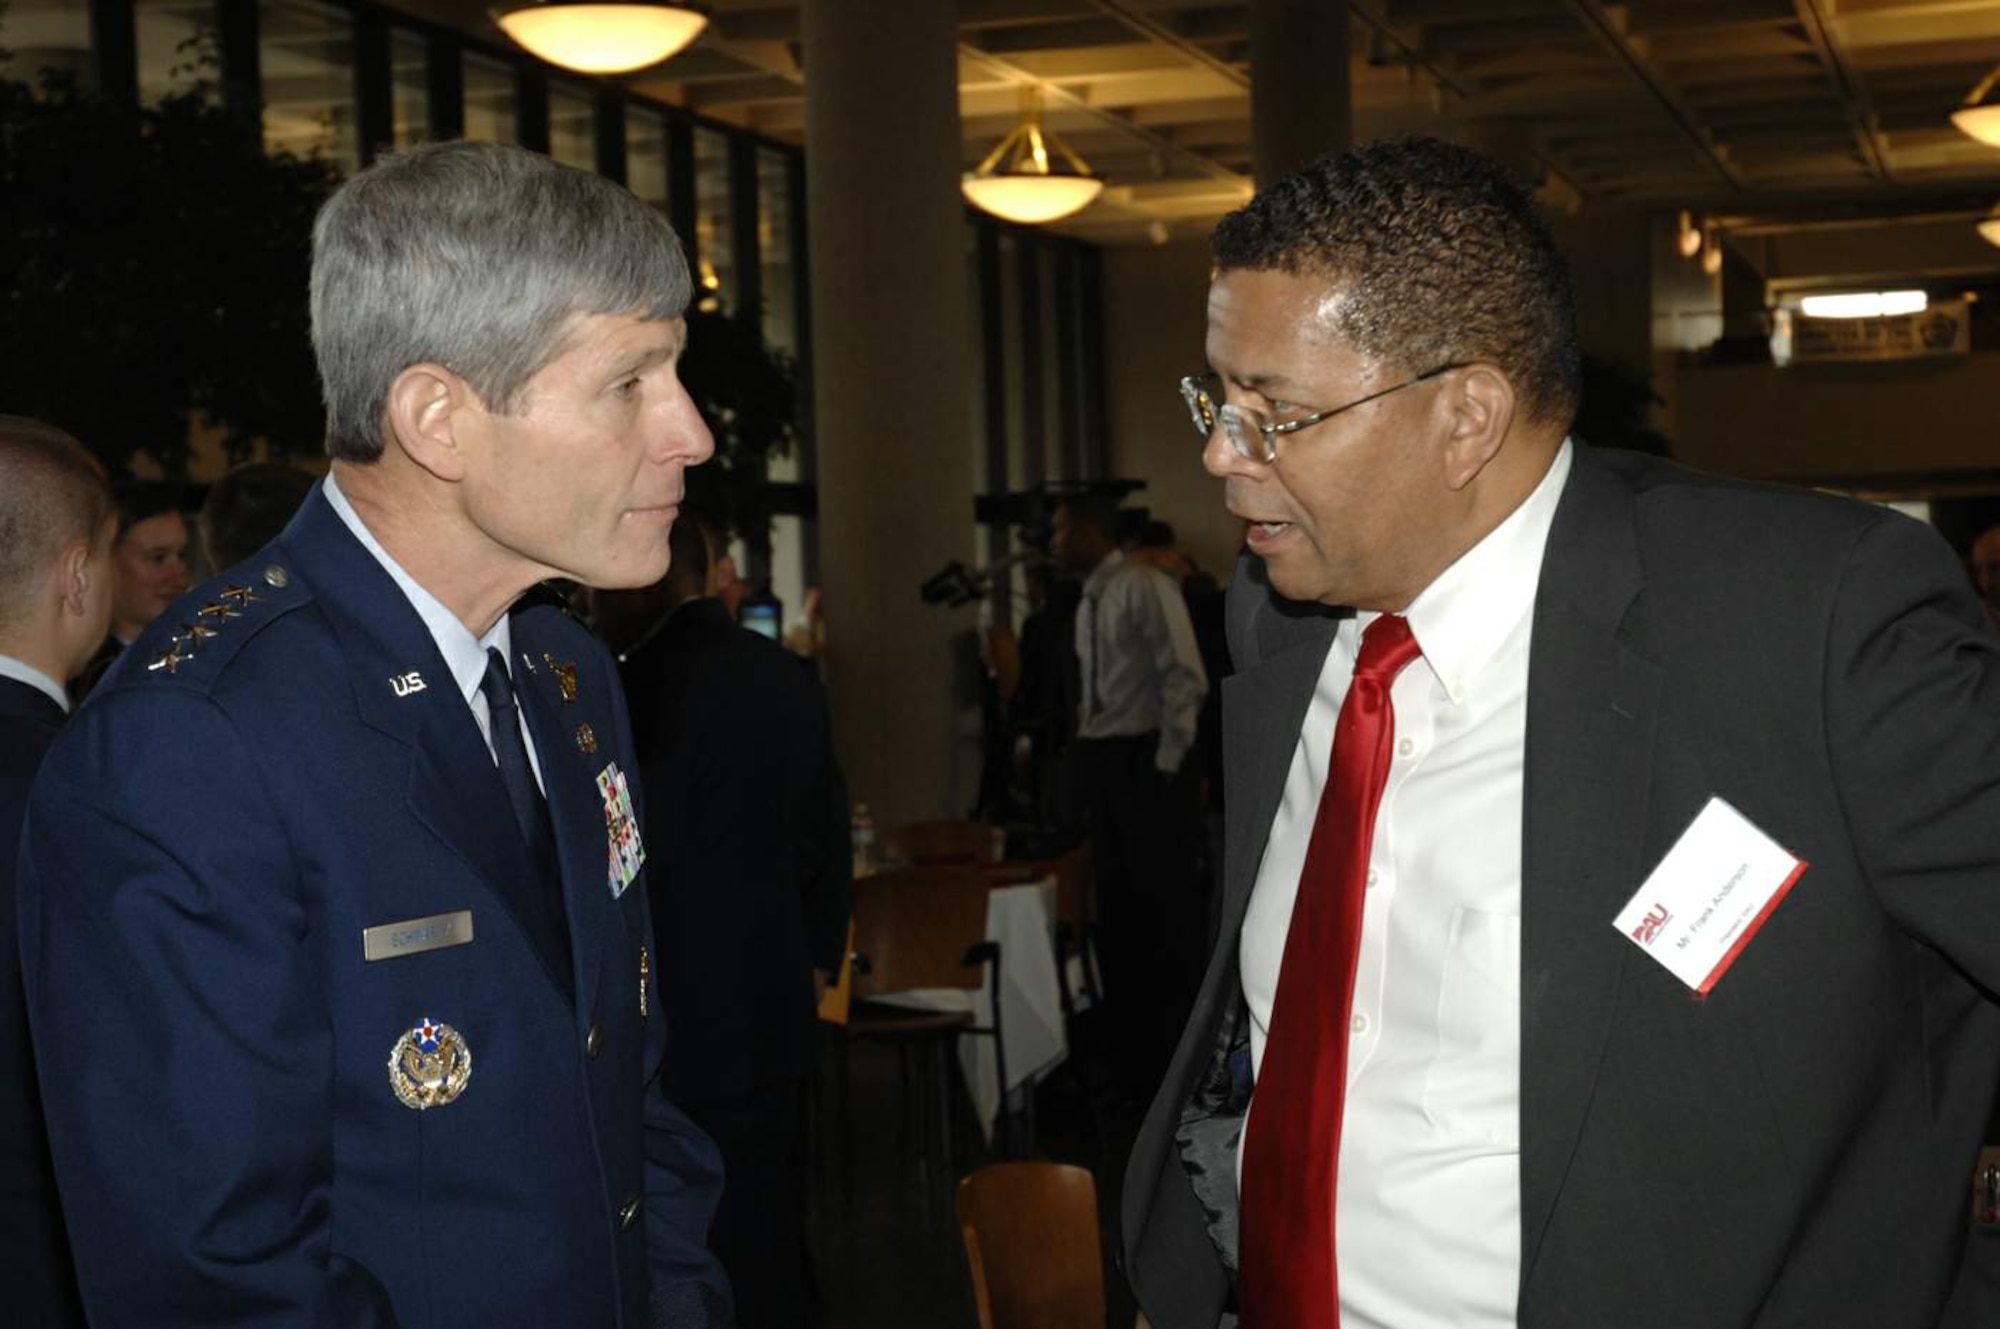 Mr. Frank Anderson, president of Defense Acquisition University, chats with Gen. Norton Schwartz, Air Force chief of staff, April 21 during DOD Acquisition Insight Days at Sinclair Community College in Dayton, Ohio. The event featured workshops, training and a forum for Air Force acquisition professionals to discuss the latest regulatory changes and ideas for speeding the delivery of new capabilities for joint warfighters. (U.S. Air Force photo/Al Bright)